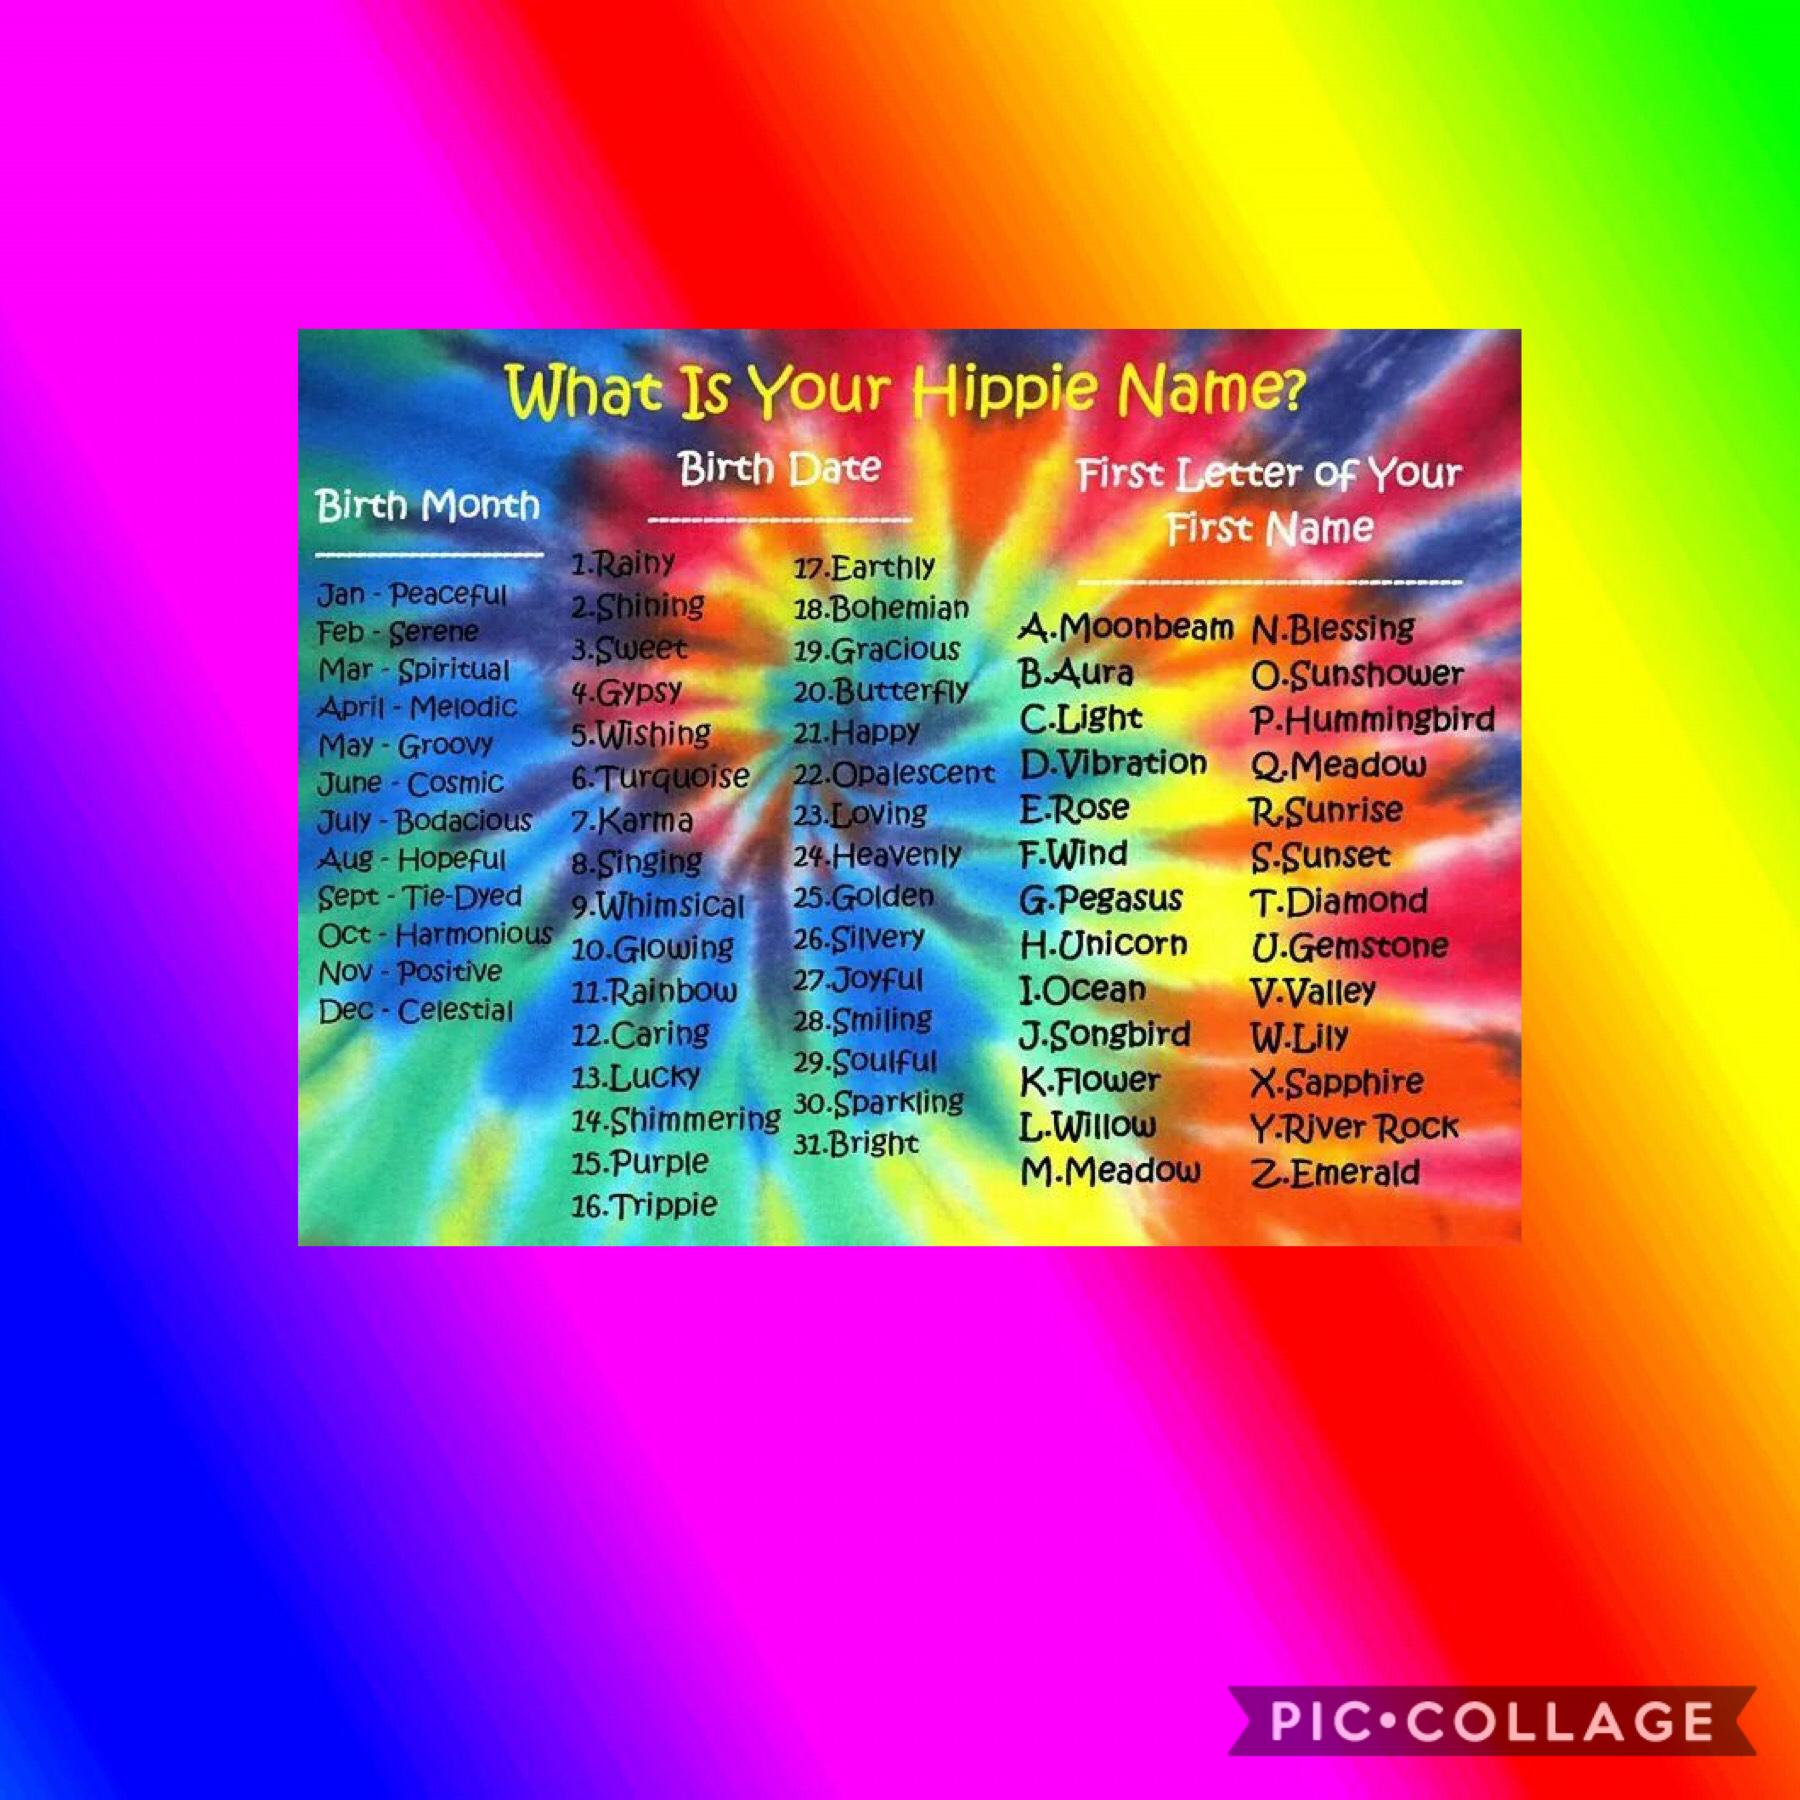 What’s your hippie name 